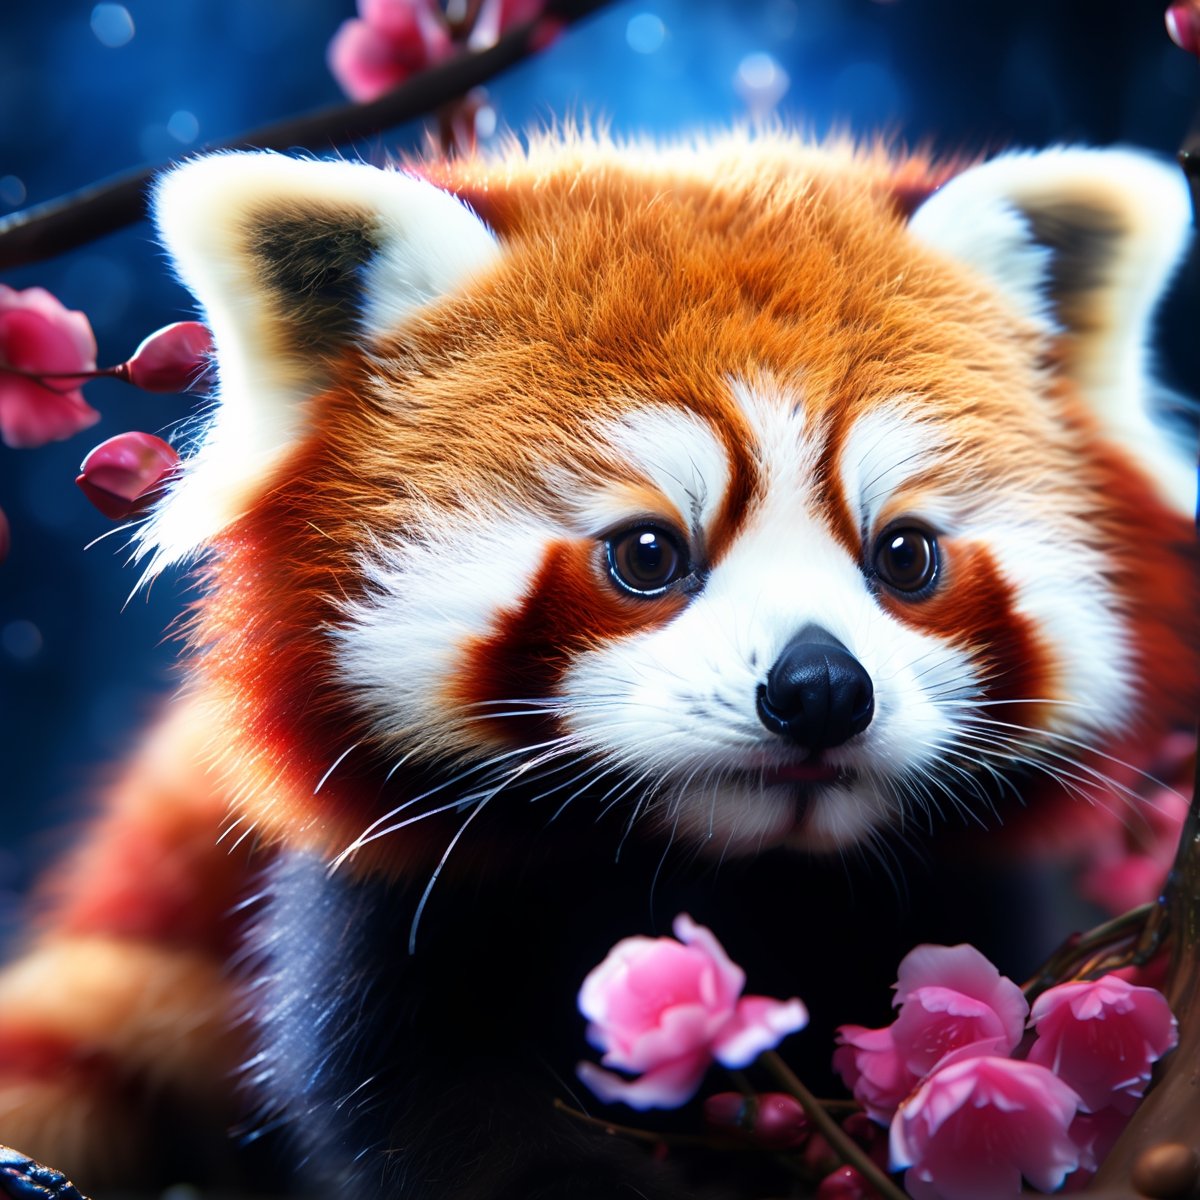 (mastrpiece, hq), a mystical world playing with baby red panda perfect clarity photorealistic beautiful quality 32k resolution, cgi